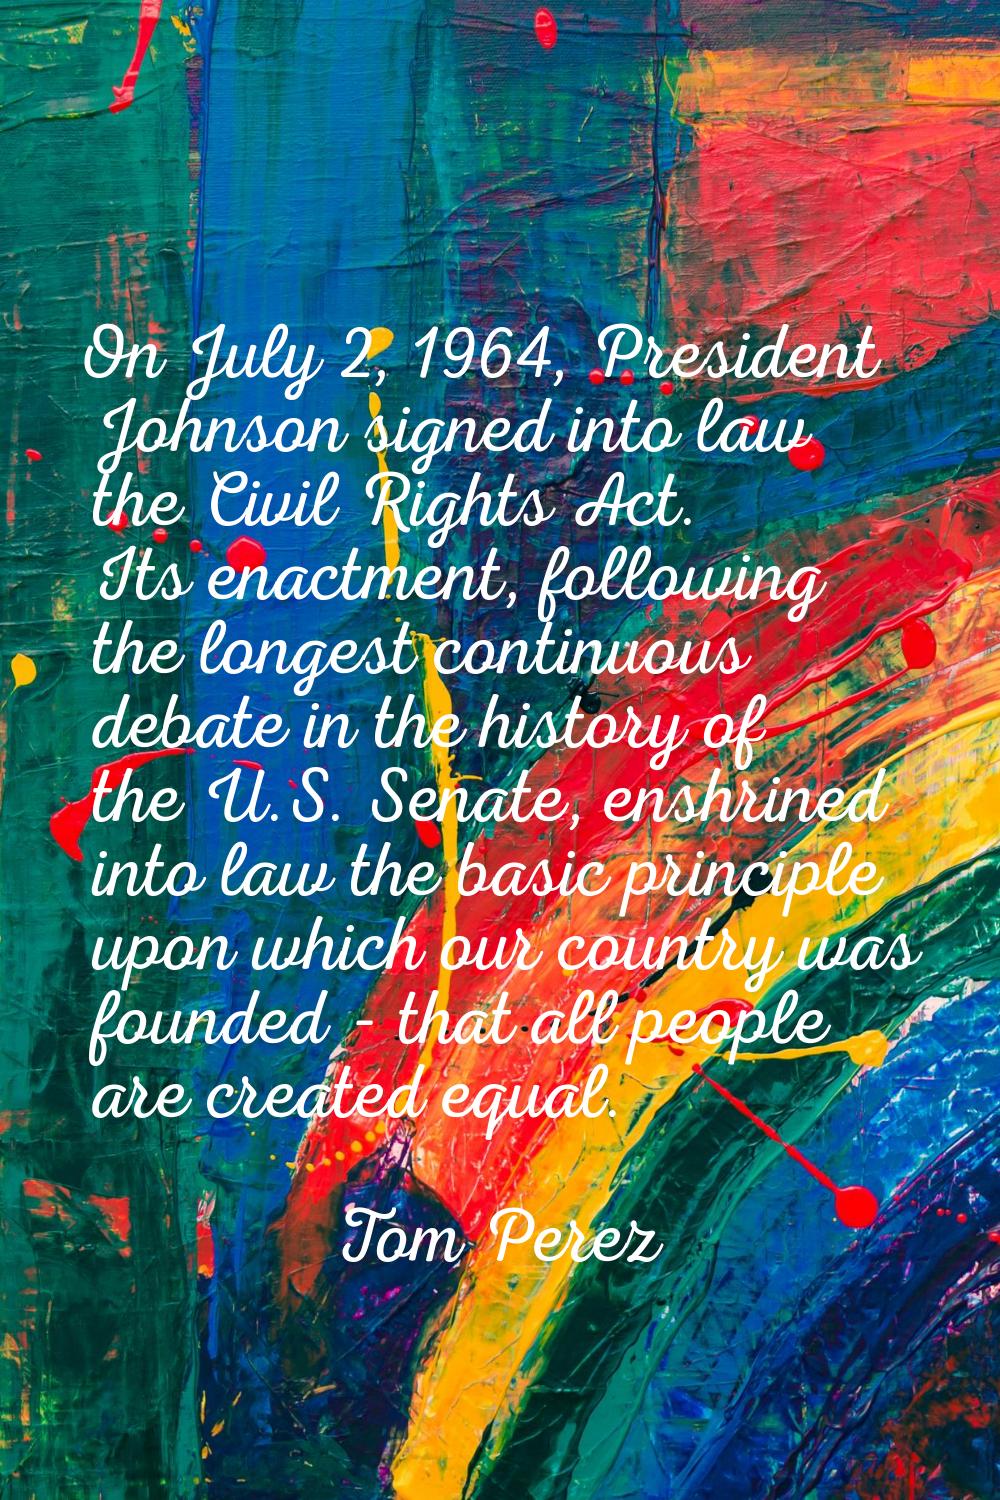 On July 2, 1964, President Johnson signed into law the Civil Rights Act. Its enactment, following t